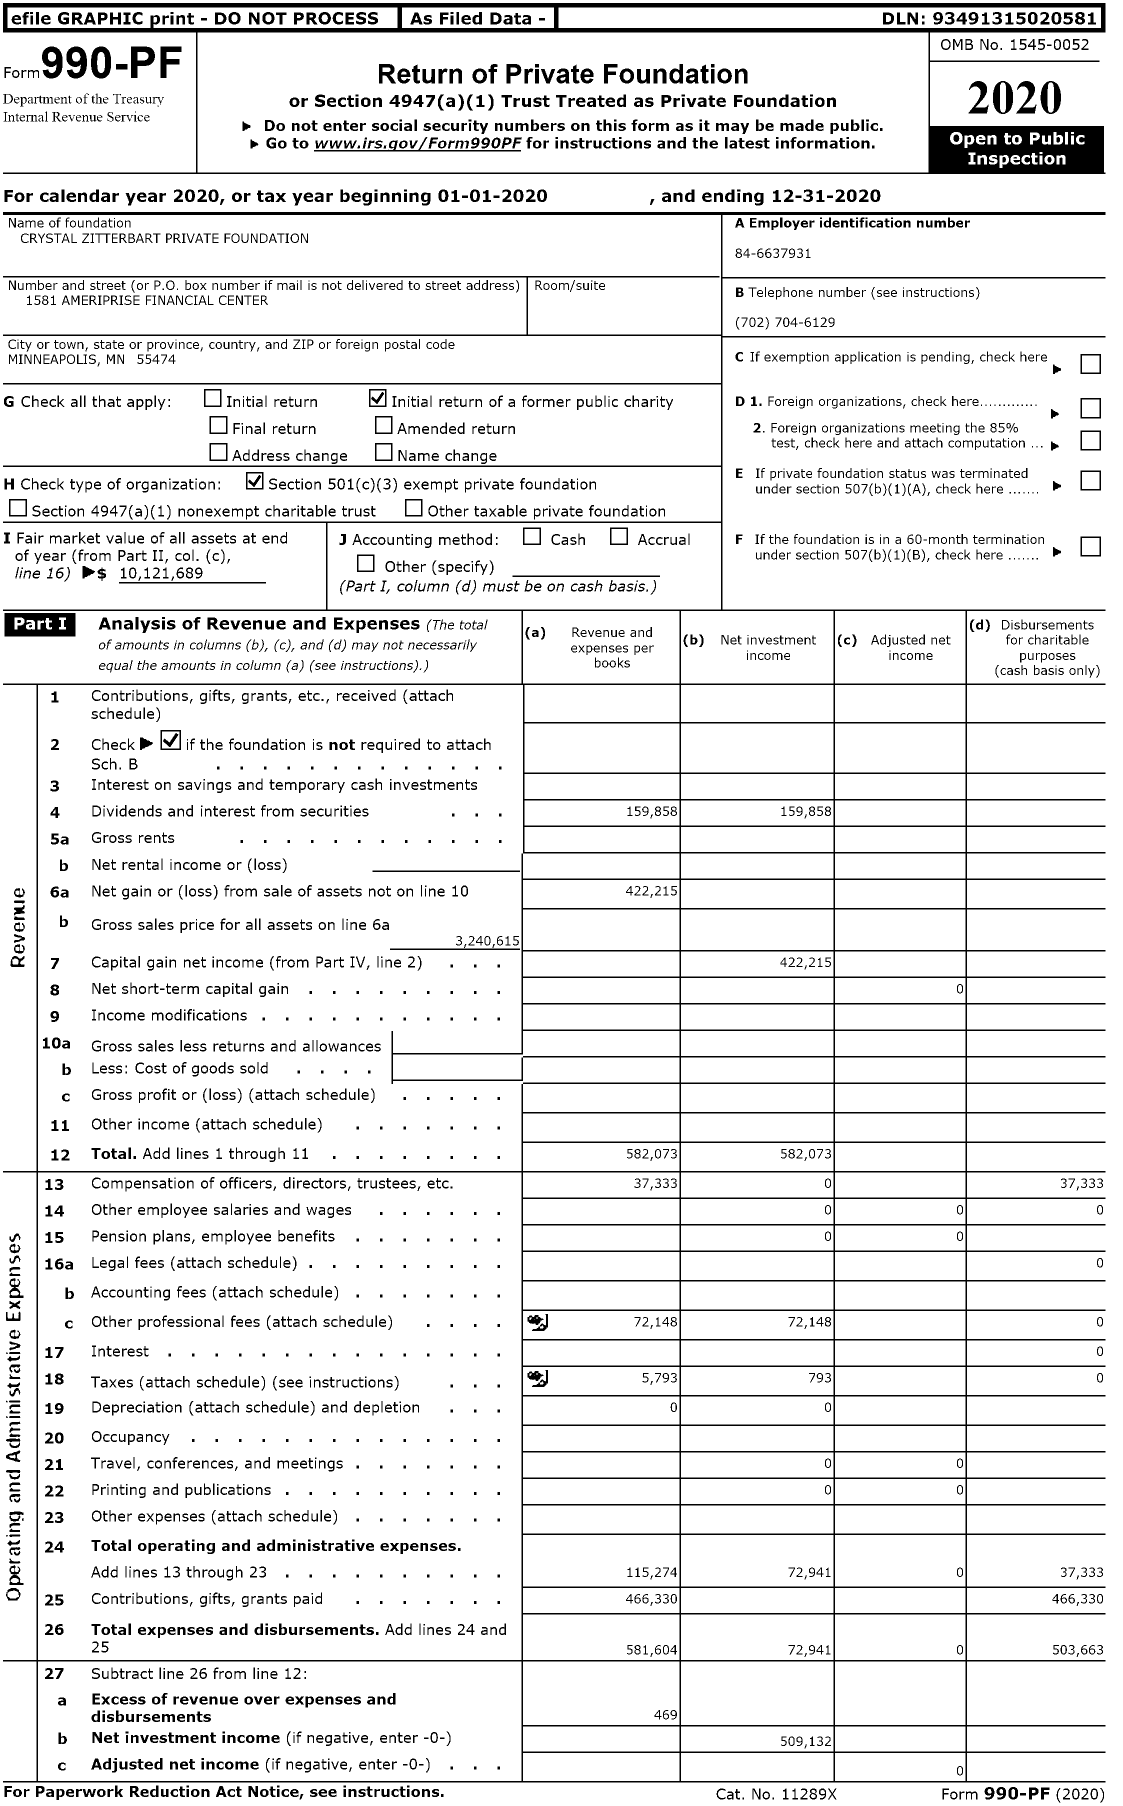 Image of first page of 2020 Form 990PF for Crystal Zitterbart Private Foundation